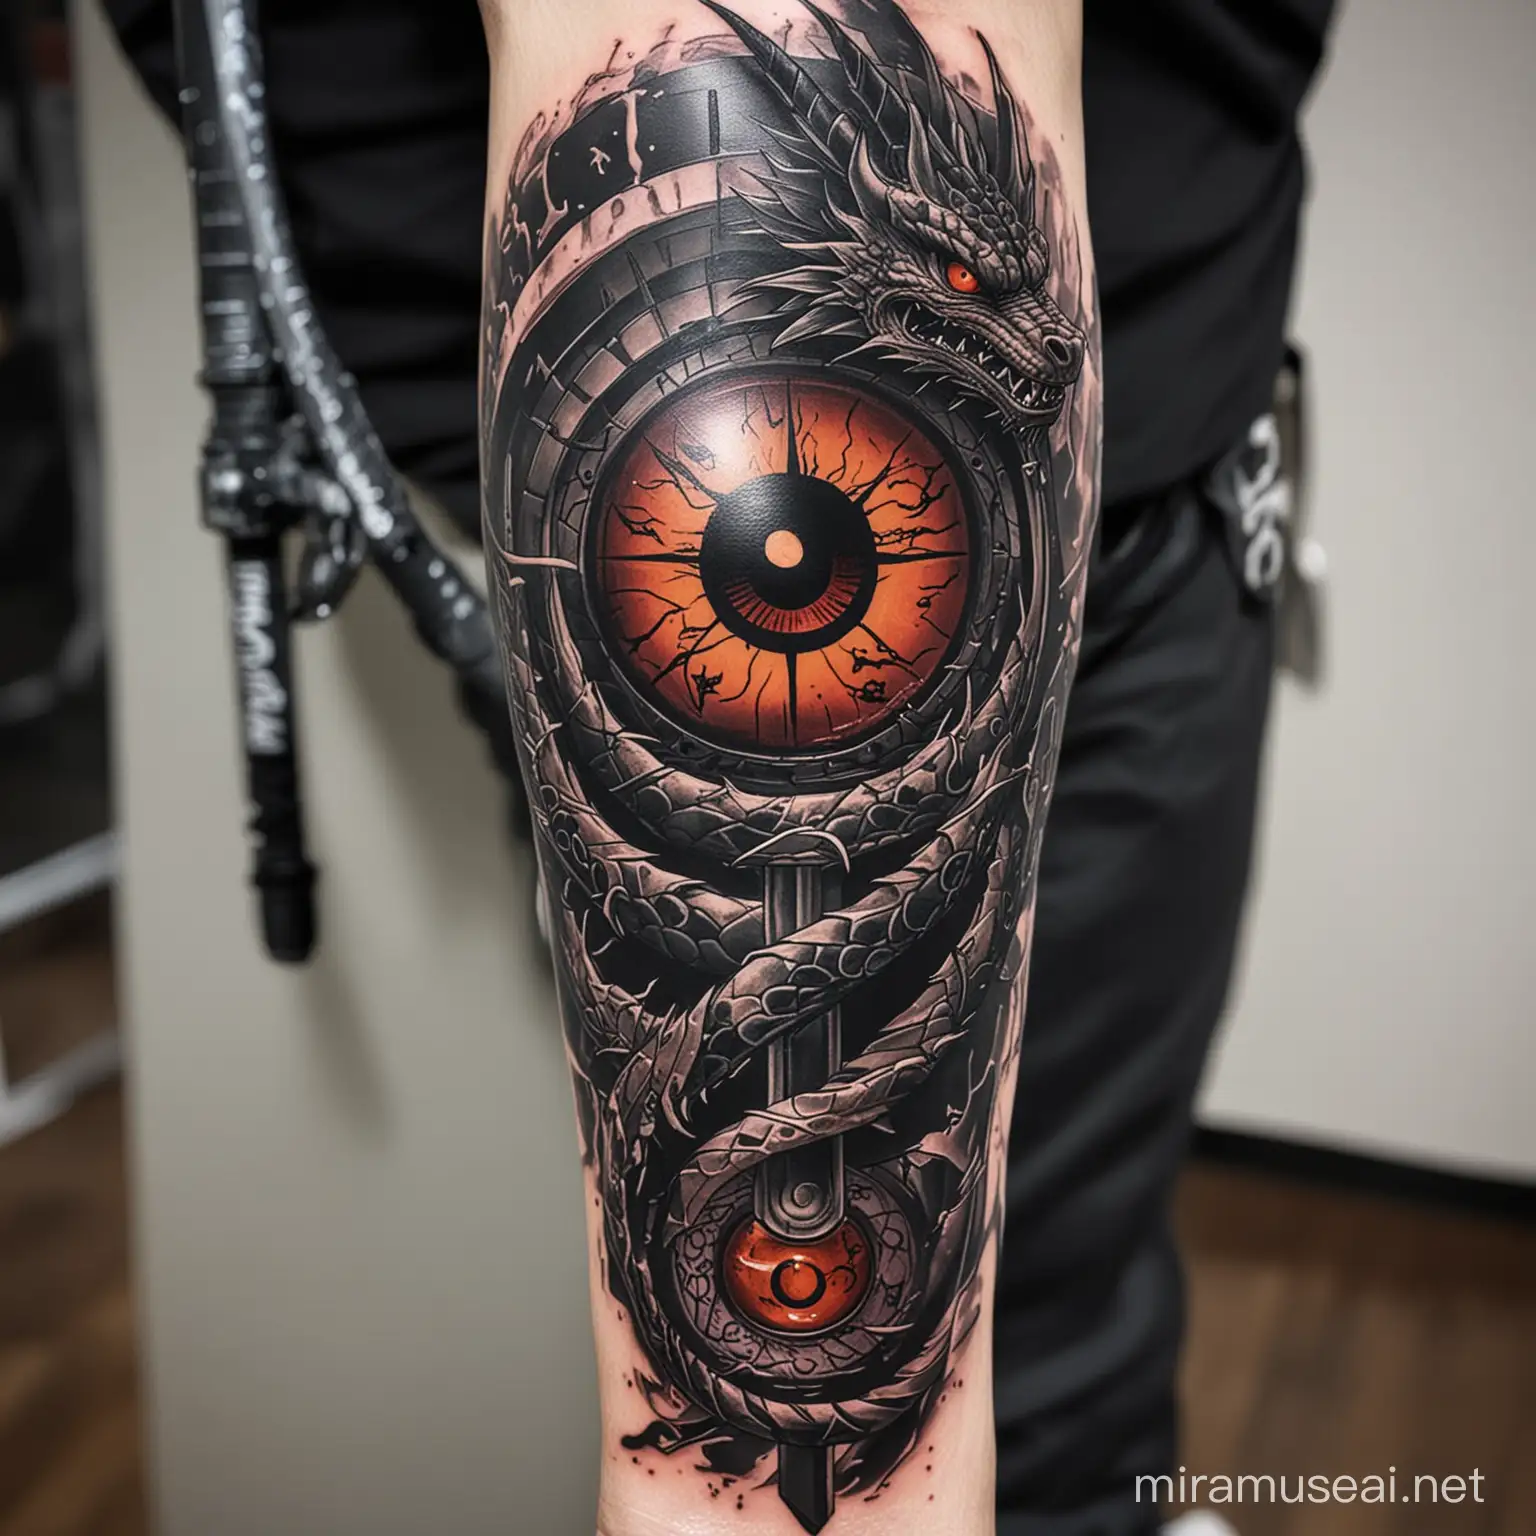 Forearm tattoo in mostly black color with dragon ball z dragon wrapped around forearm and sharingan rinnegan eyes and demon slayer sword are attached in front side